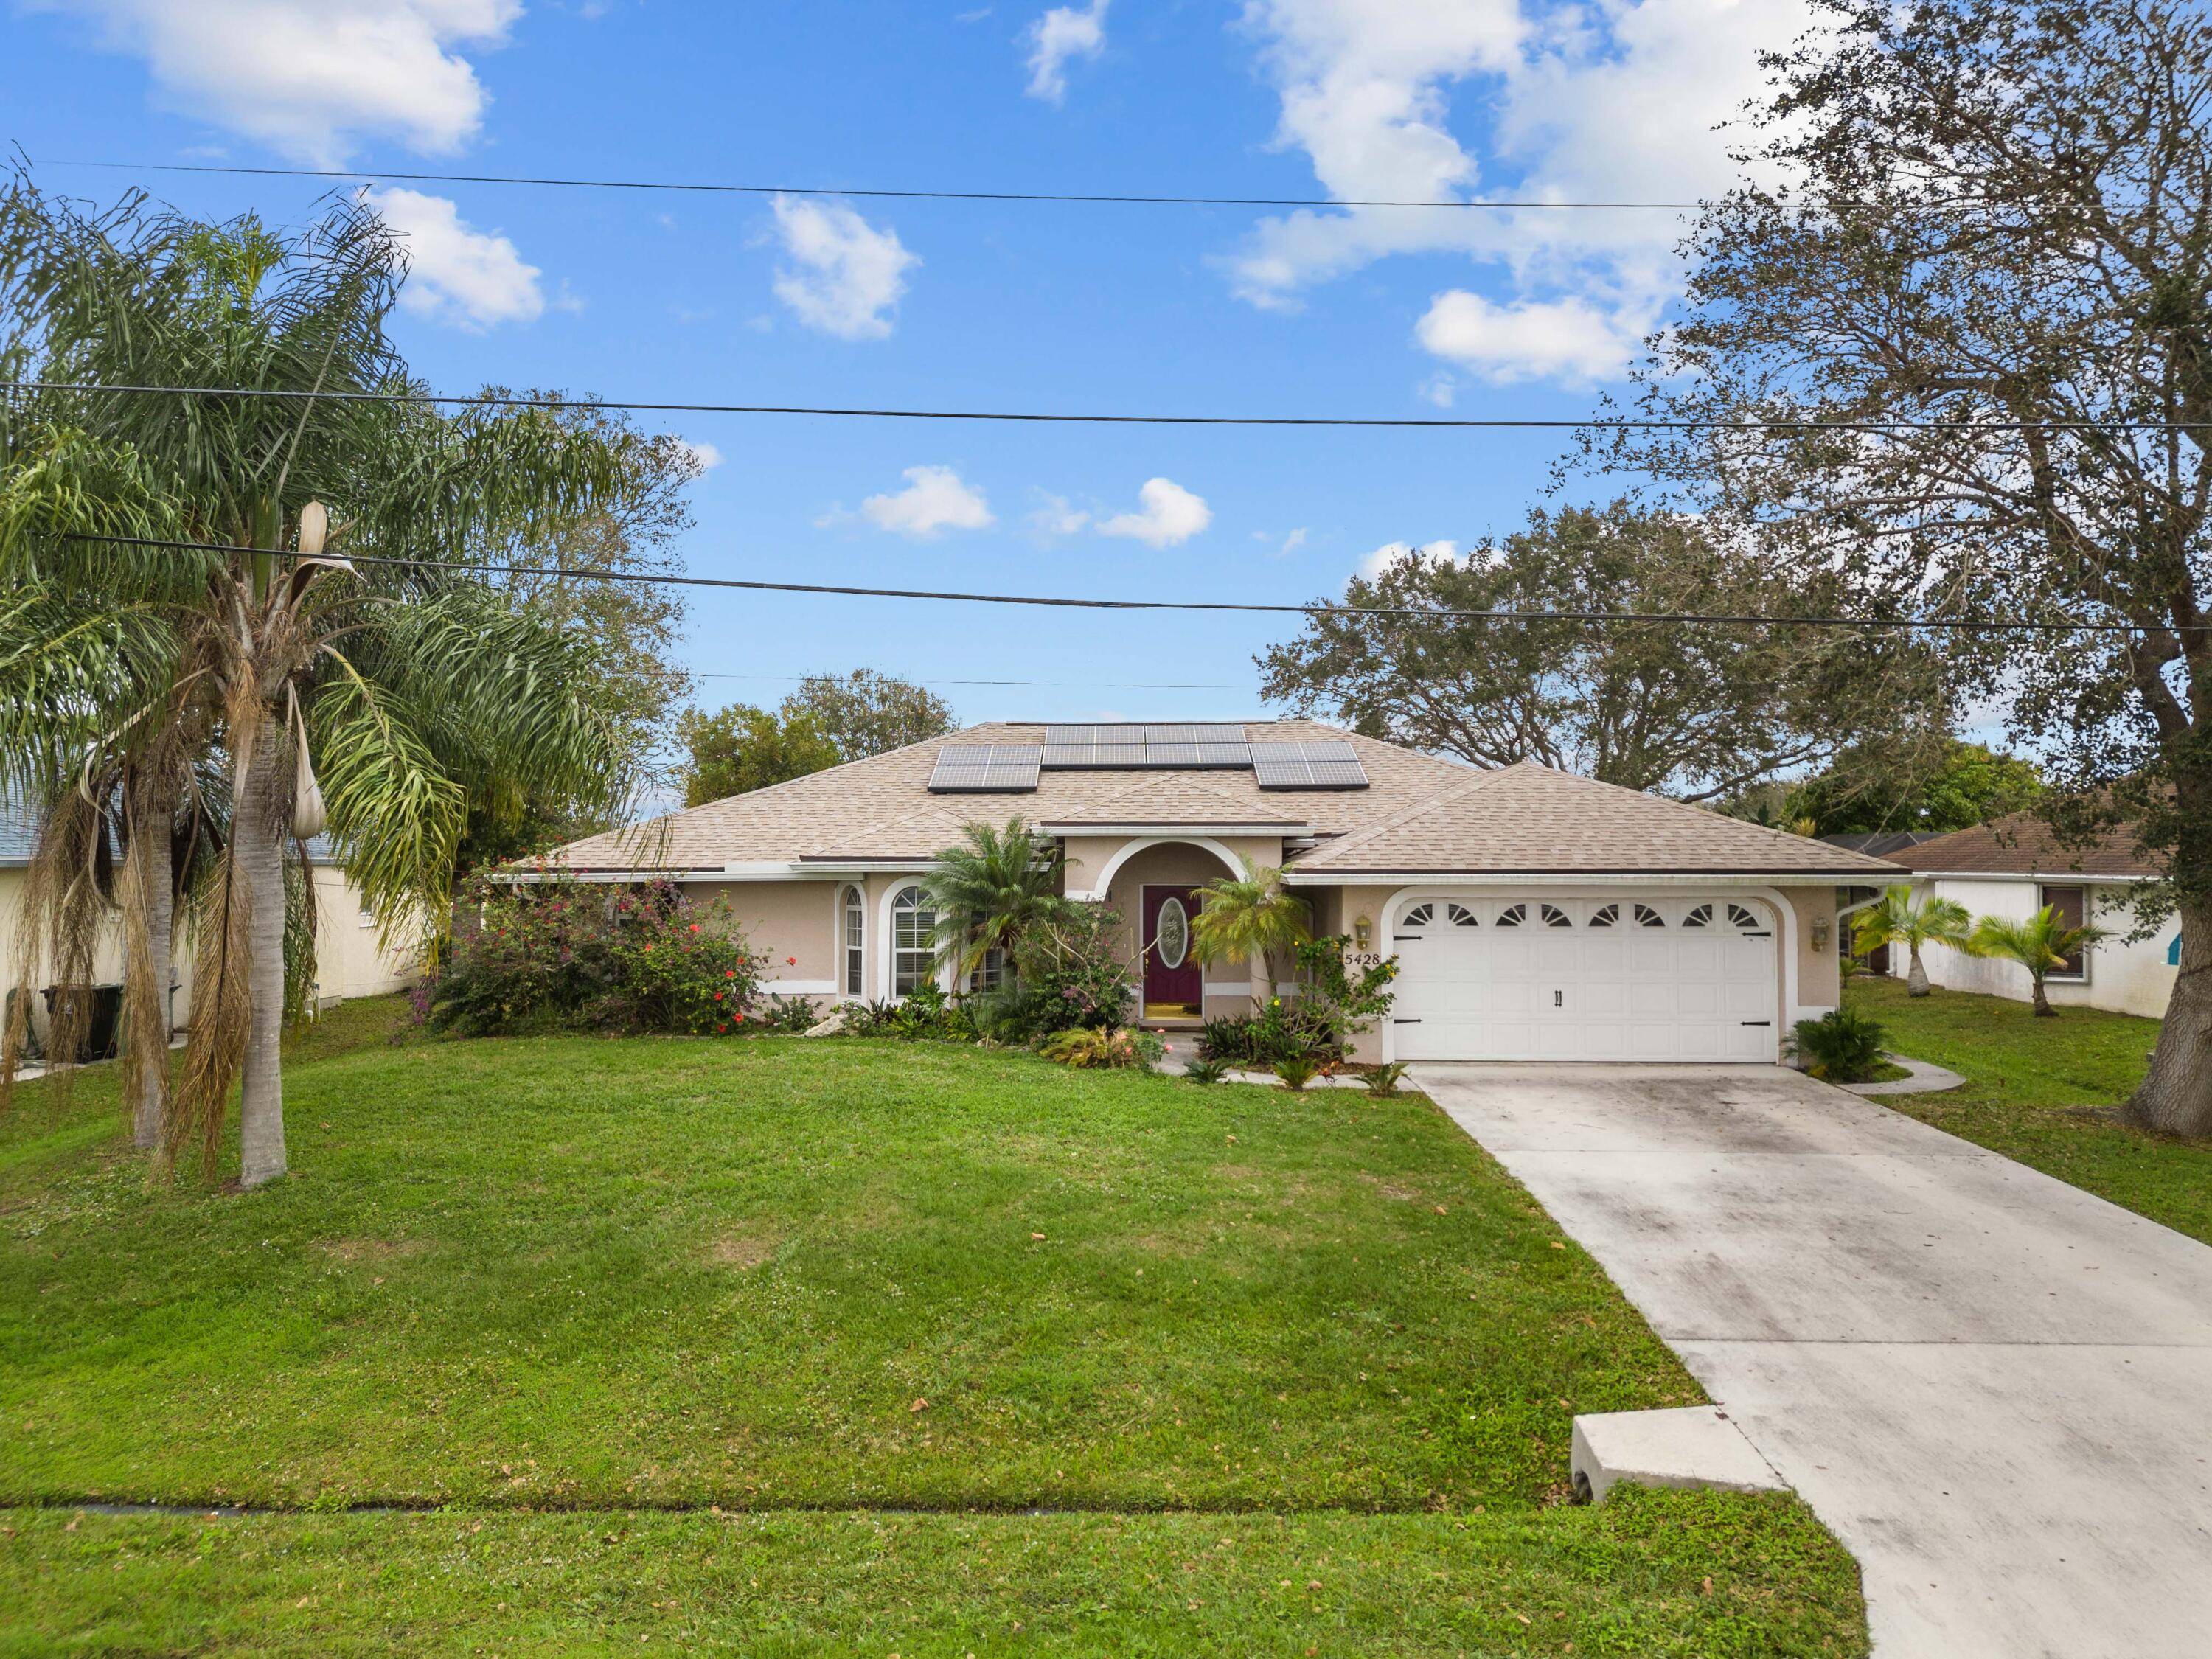 RARE ! Waterfront Spacious Beauty, over 2, 000 sq ft CBS home, No HOA, 4 bedrooms, plus an additional waterfront office with a separate entrance off the screened patio.